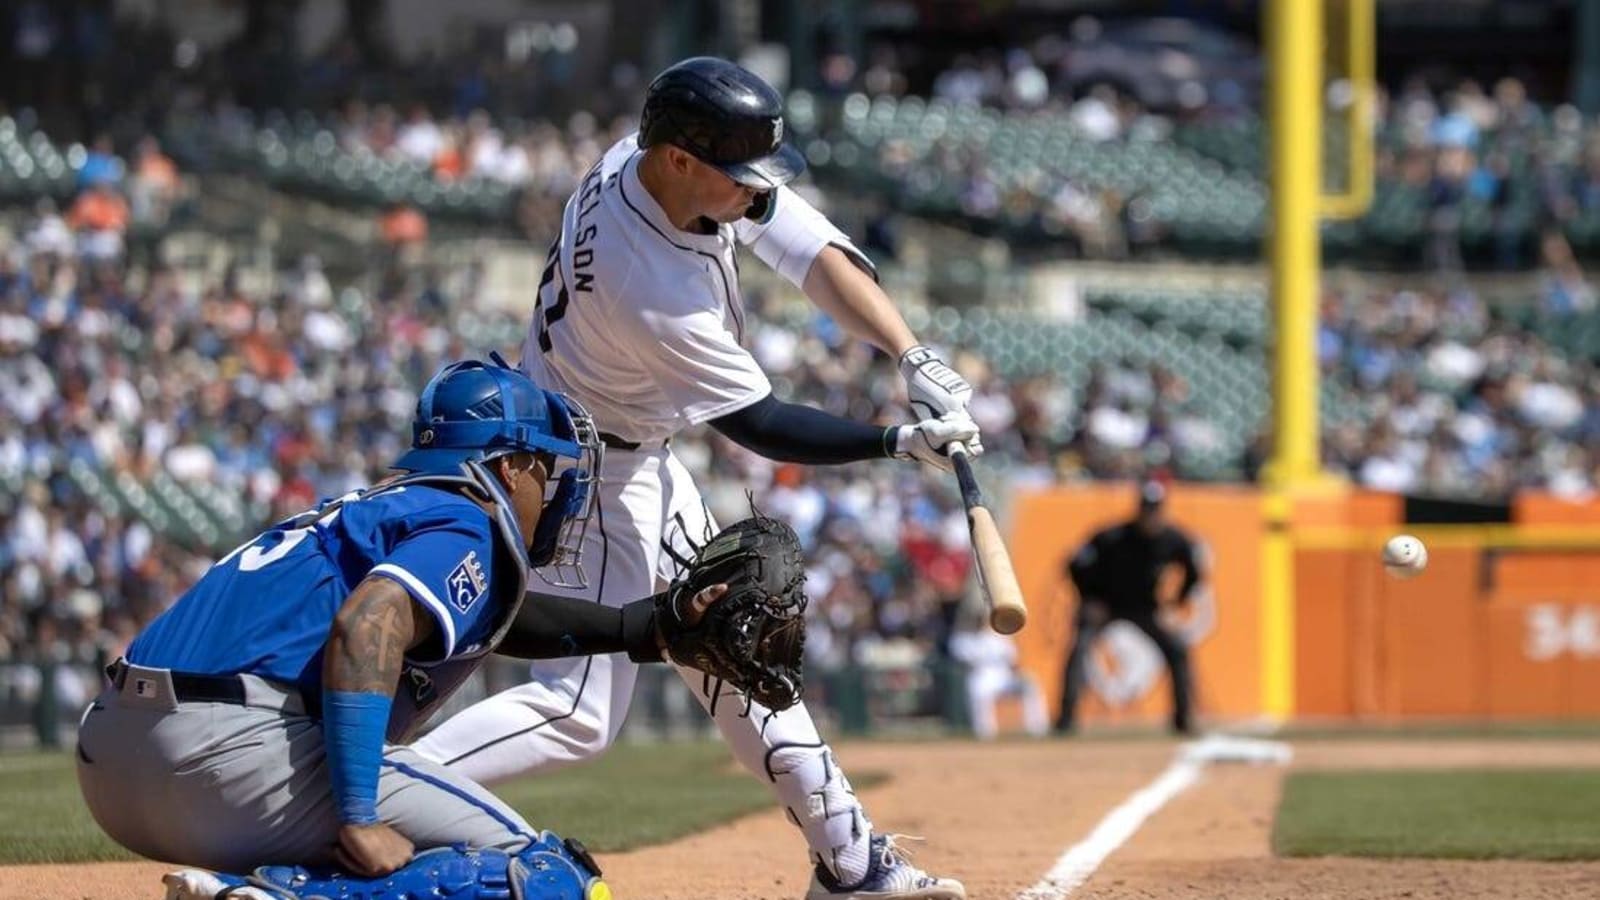 Tigers seek to ignite offense in rematch vs. surging Royals